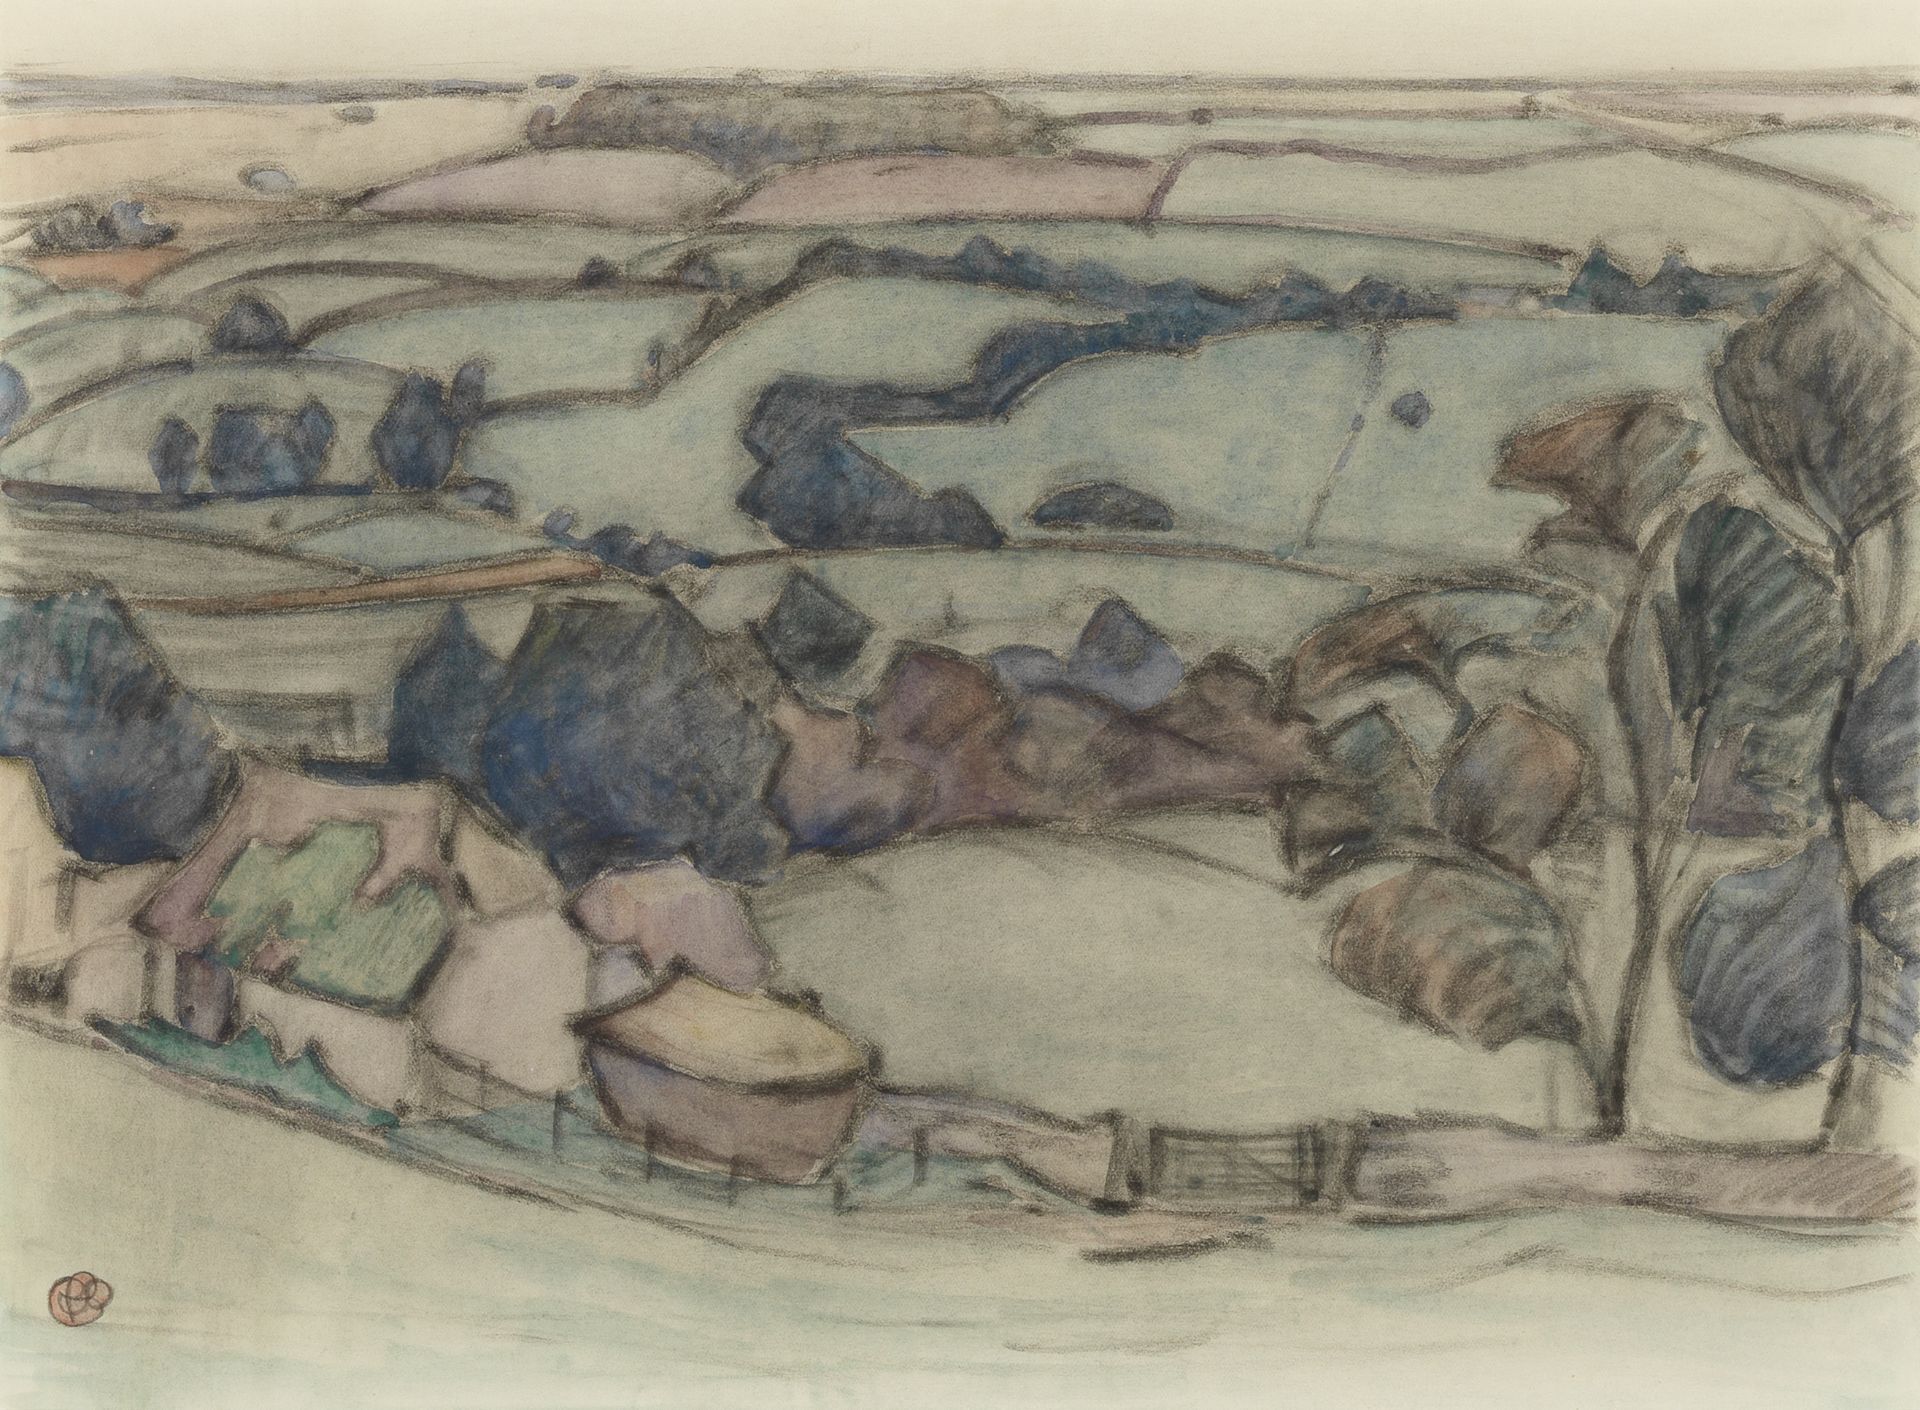 Robert Polhill Bevan (British, 1865-1925) In the Upper Culm Valley (Executed in 1916)